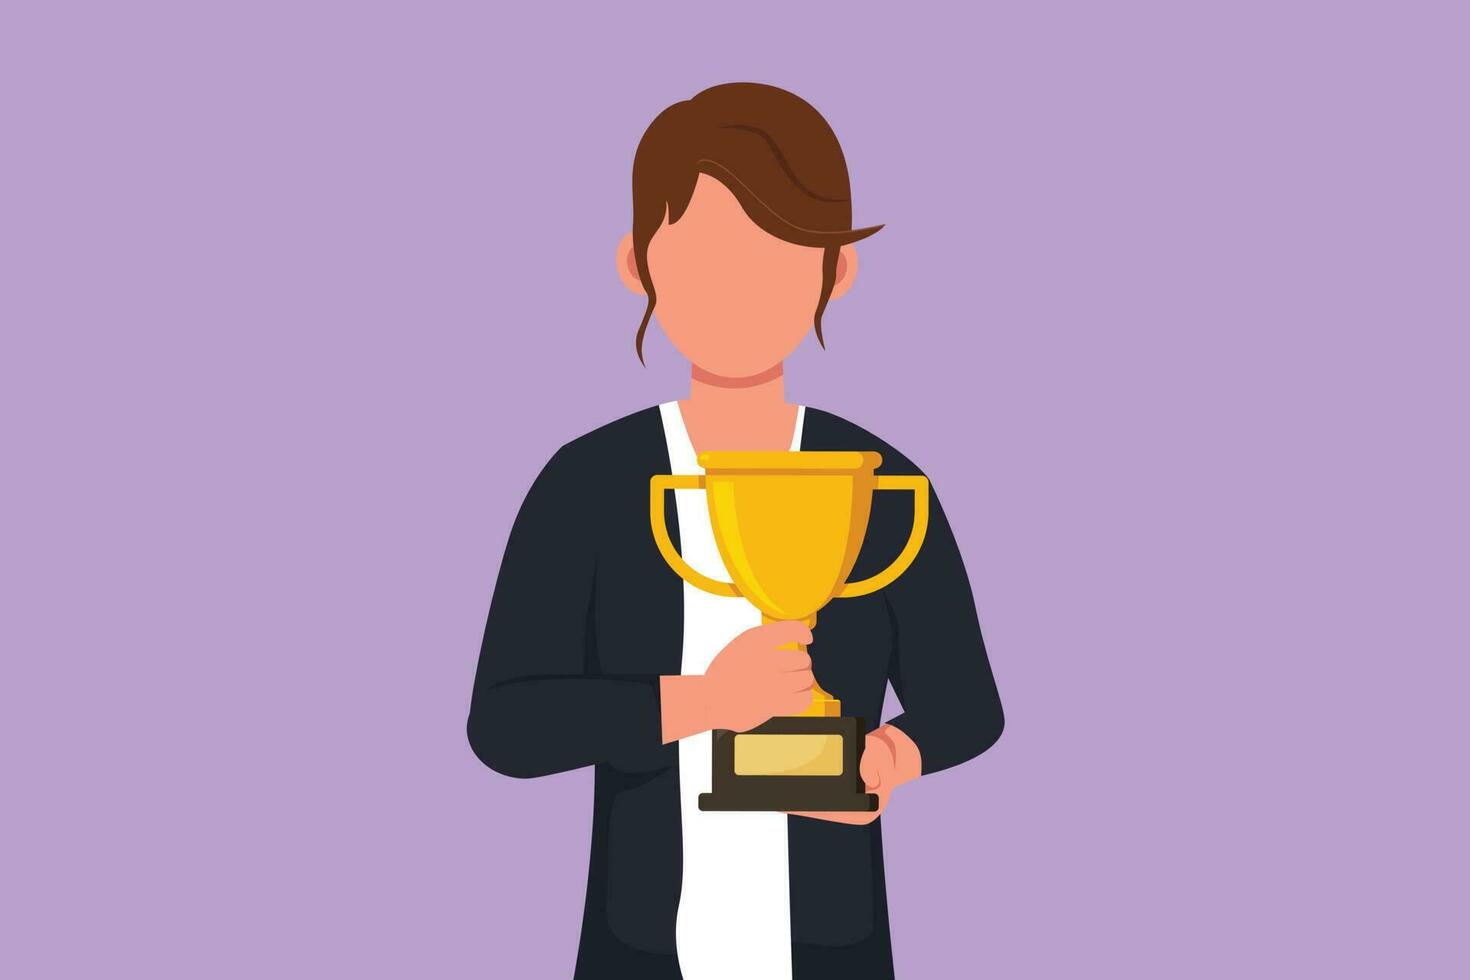 Character flat drawing happy businesswoman in formal blazer holding golden trophy with both hand in front of her chest. Winning business competition or achievement. Cartoon design vector illustration